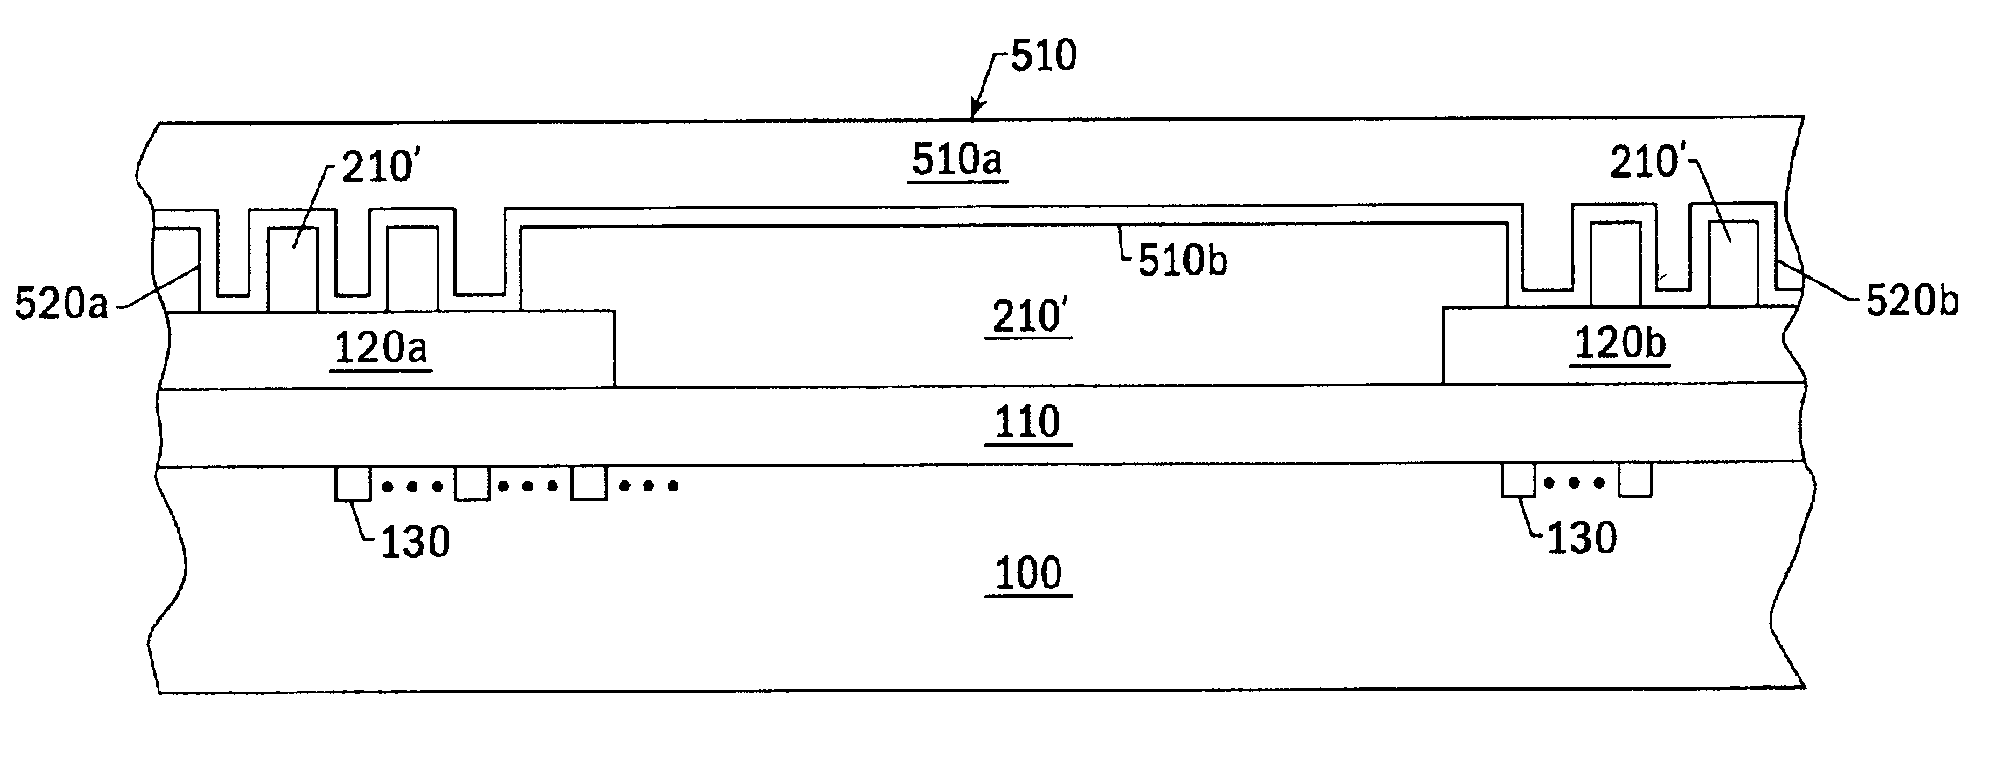 Multiple copper vias for integrated circuit metallization and methods of fabricating same